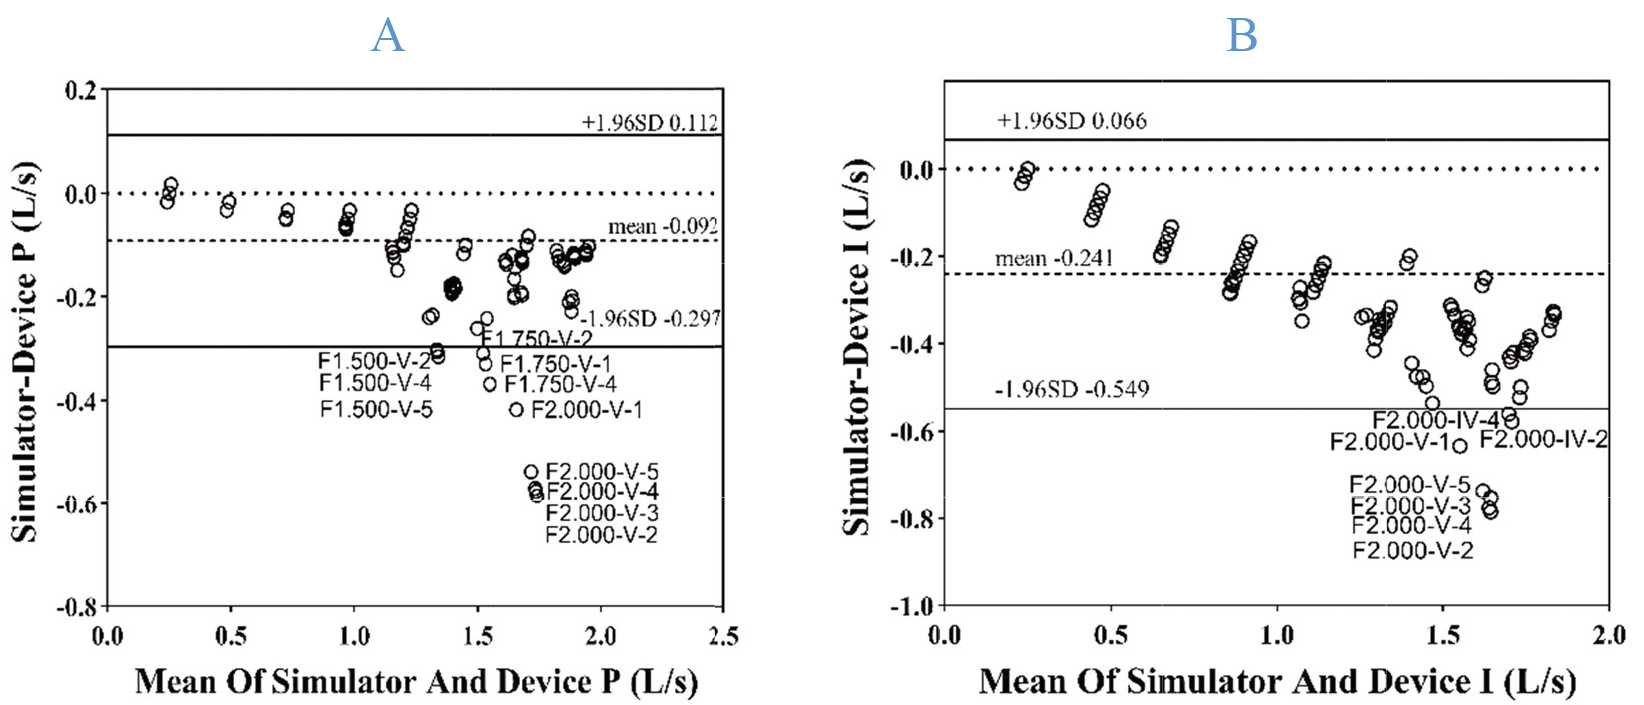 Bland-Altman plots for measured values from these two devices and standard simulator values, with the limits of agreement extending from -1.96SD to +1.96SD (solid lines). Note: The meaning of the symbol of the test point in the chart is that the F represents Flow, the number after it represents the flow value set by the simulator, the IV and V represent the resistance gear, and the Arabic number after it is the number of tests. (A) Bland-Altman plots for measured values from Device P and standard simulator values. 94.50% (189/200) of data points were within the 95% limits of agreement (95% LOA). (B) Bland-Altman plots for measured values from Device I and standard simulator values. 96.50% (193/200) of data points were within the 95% LOA.